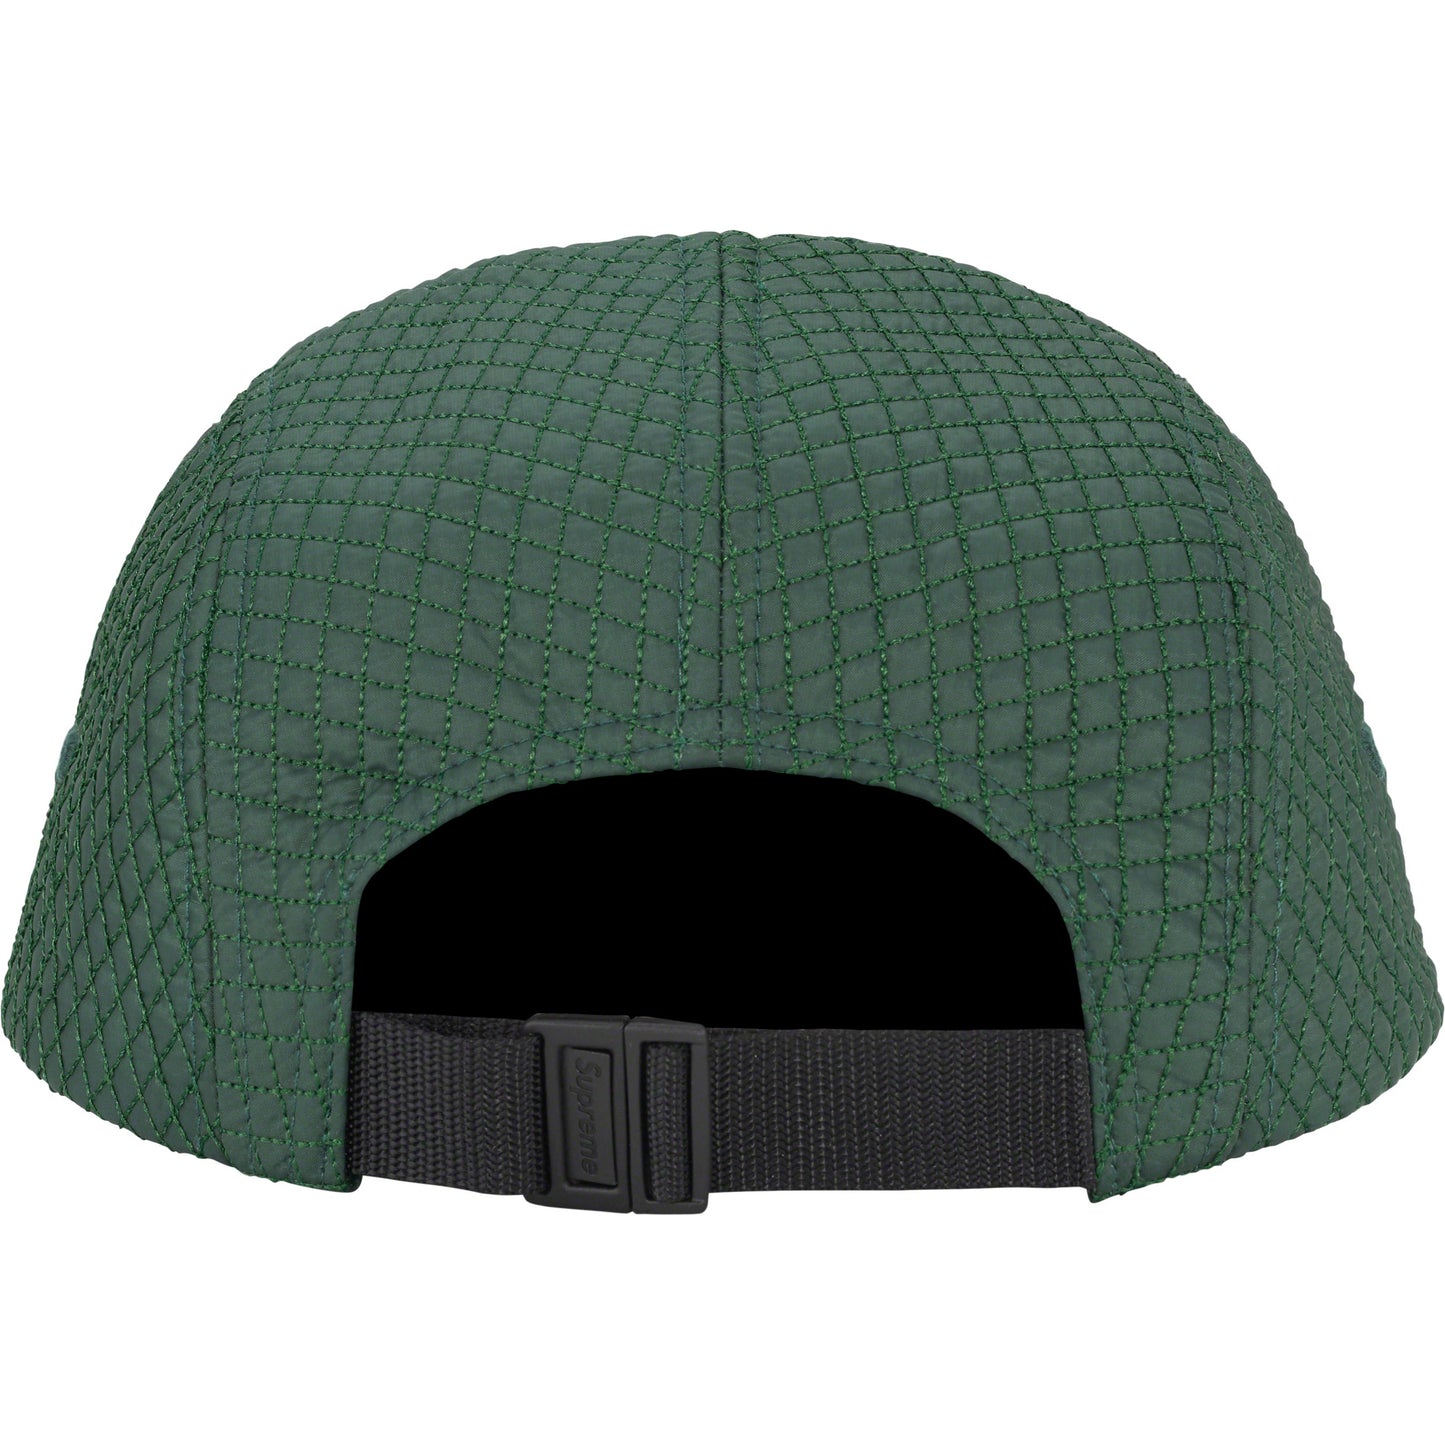 Supreme Micro Quilted Camp Cap Pine